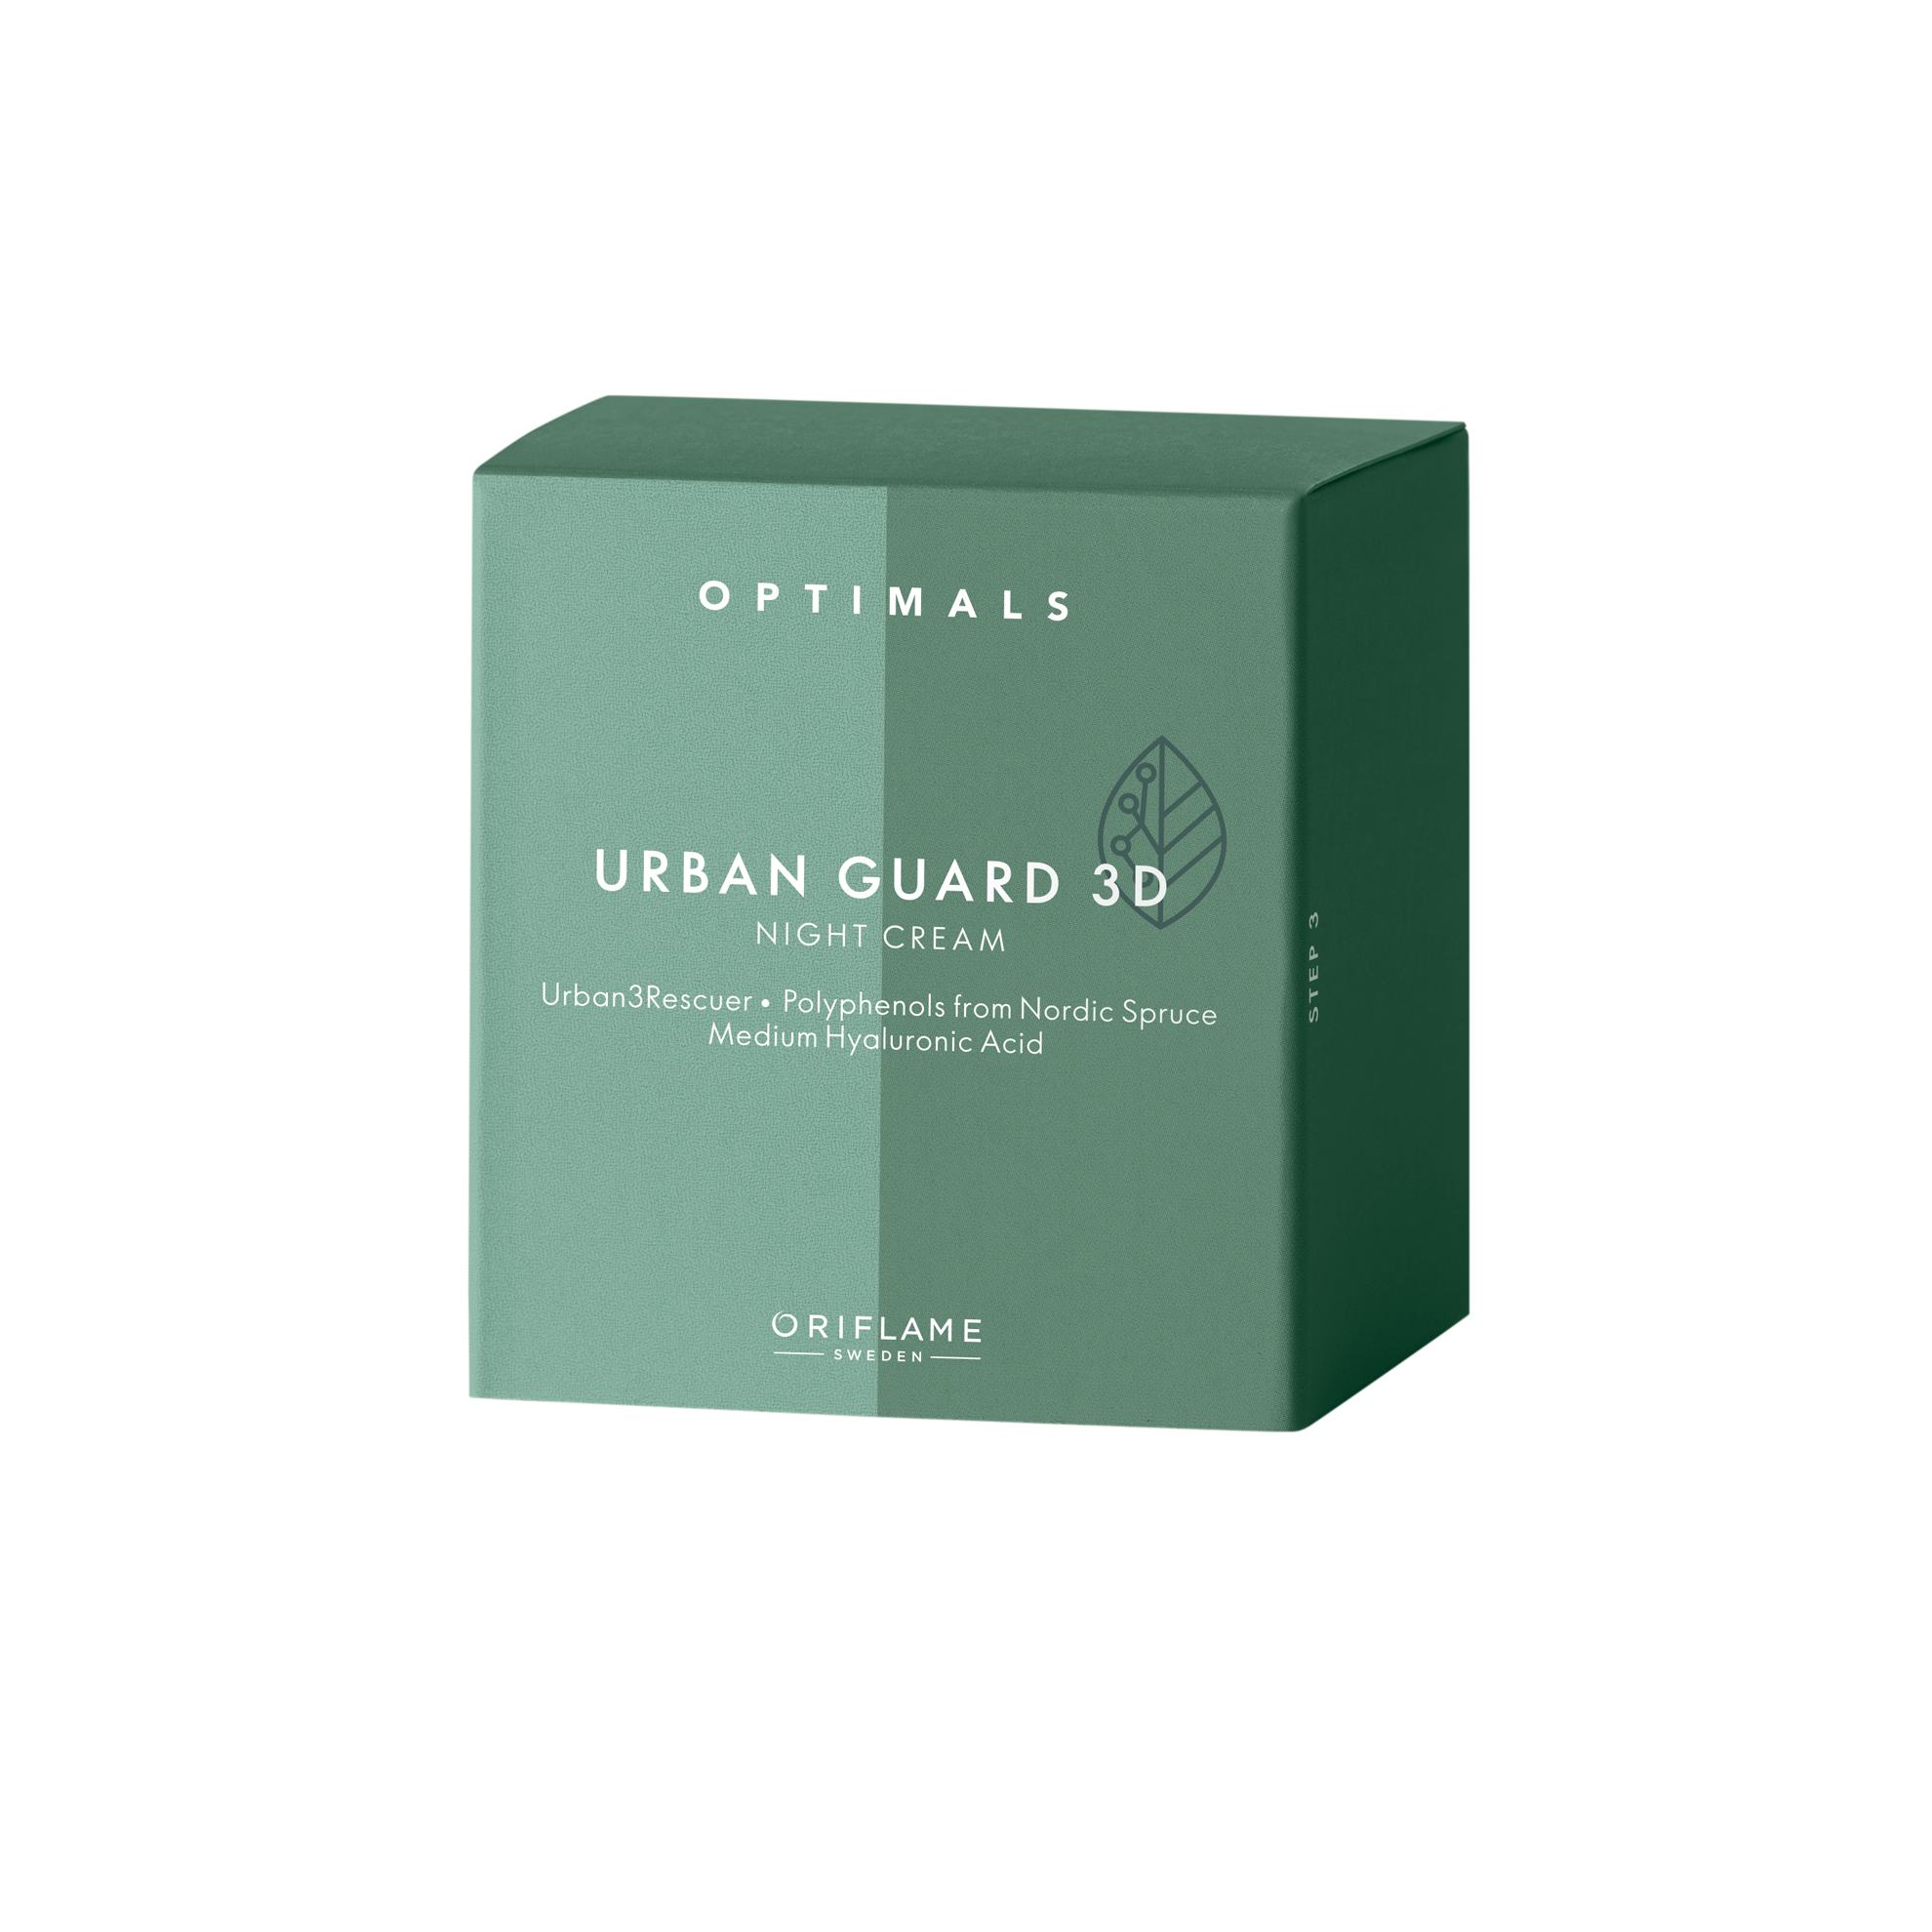 https://media-cdn.oriflame.com/productImage?externalMediaId=product-management-media%2fProducts%2f44260%2fAM%2f44260_1.png&id=15186919&version=1